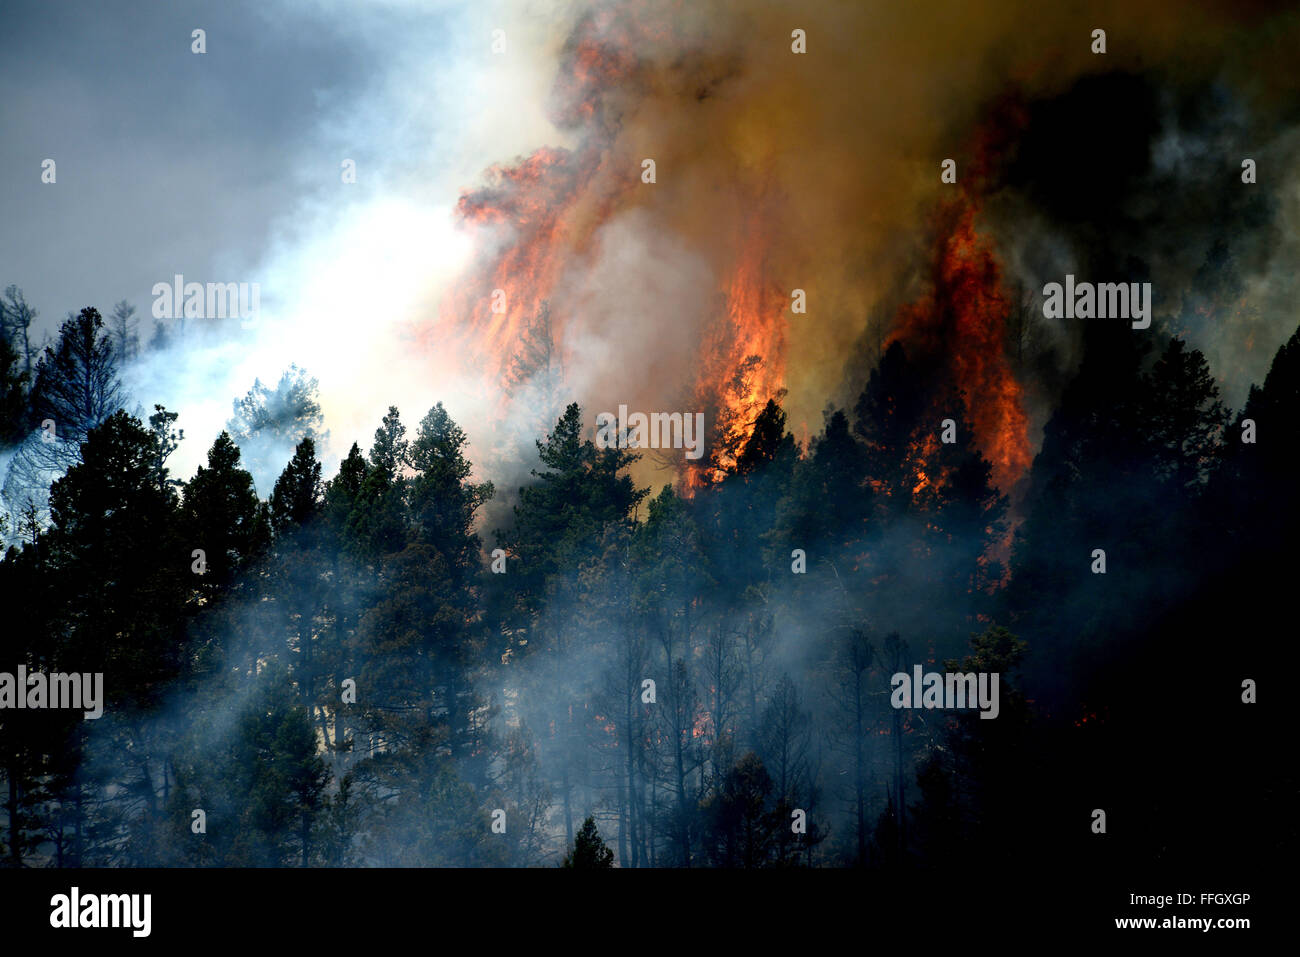 Flames tower over the tree line in the Mount St. Francis area of Colorado Springs, Colo. Air Force and civilian firefighters battled several fires in Waldo Canyon. The fire had grown to more than 18,500 acres and burned more than 300 homes. Stock Photo